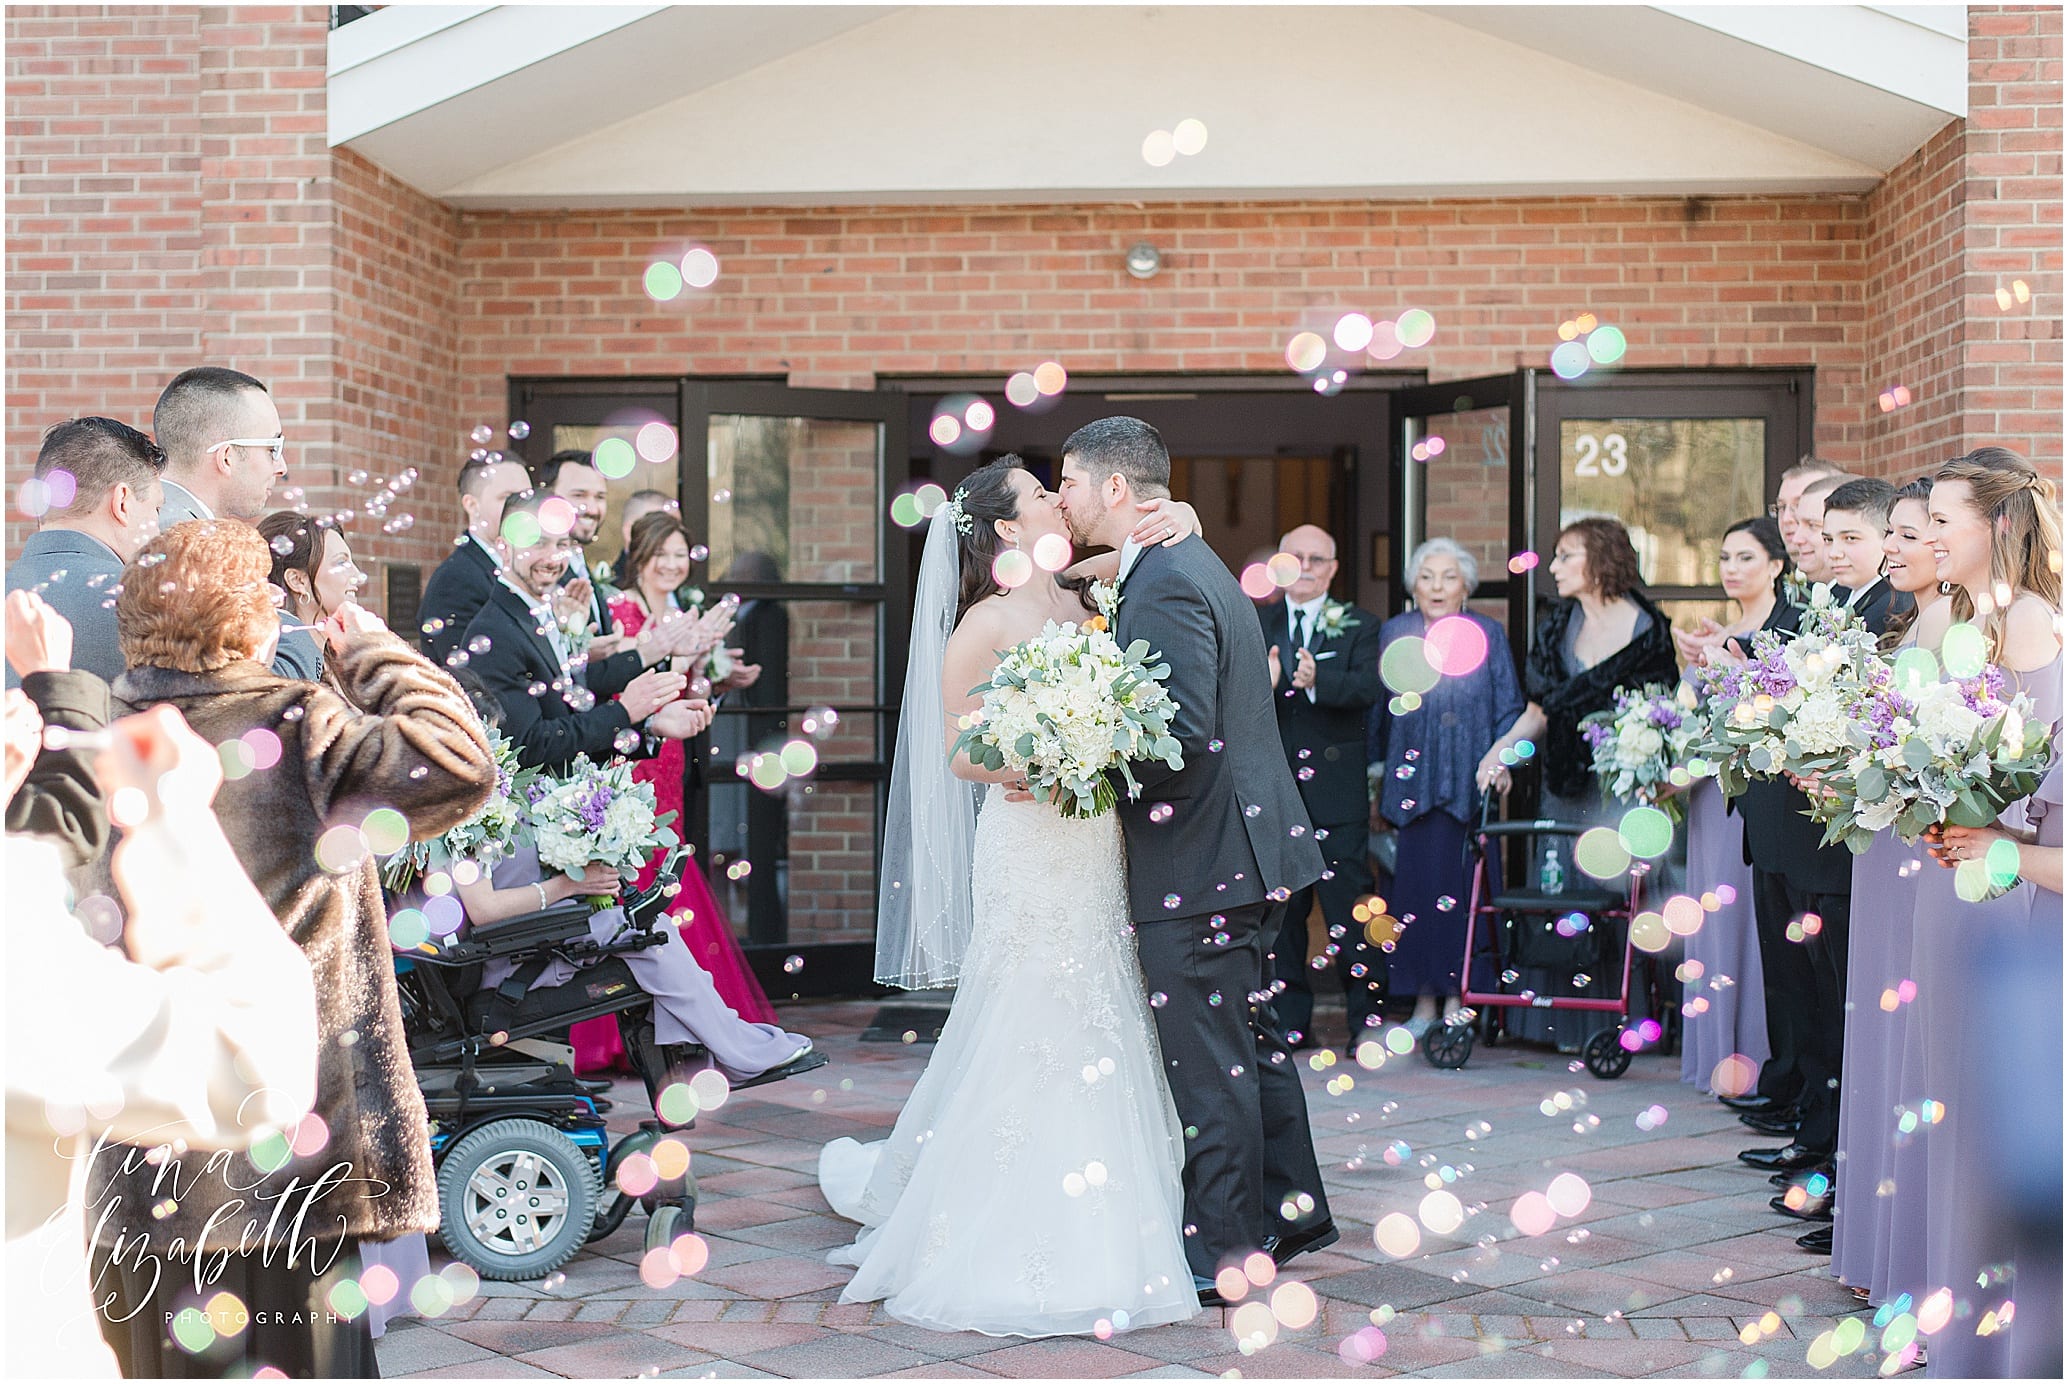 Bubble church exit - The Palace at Somerset Park winter wedding by Tina Elizabeth Photography